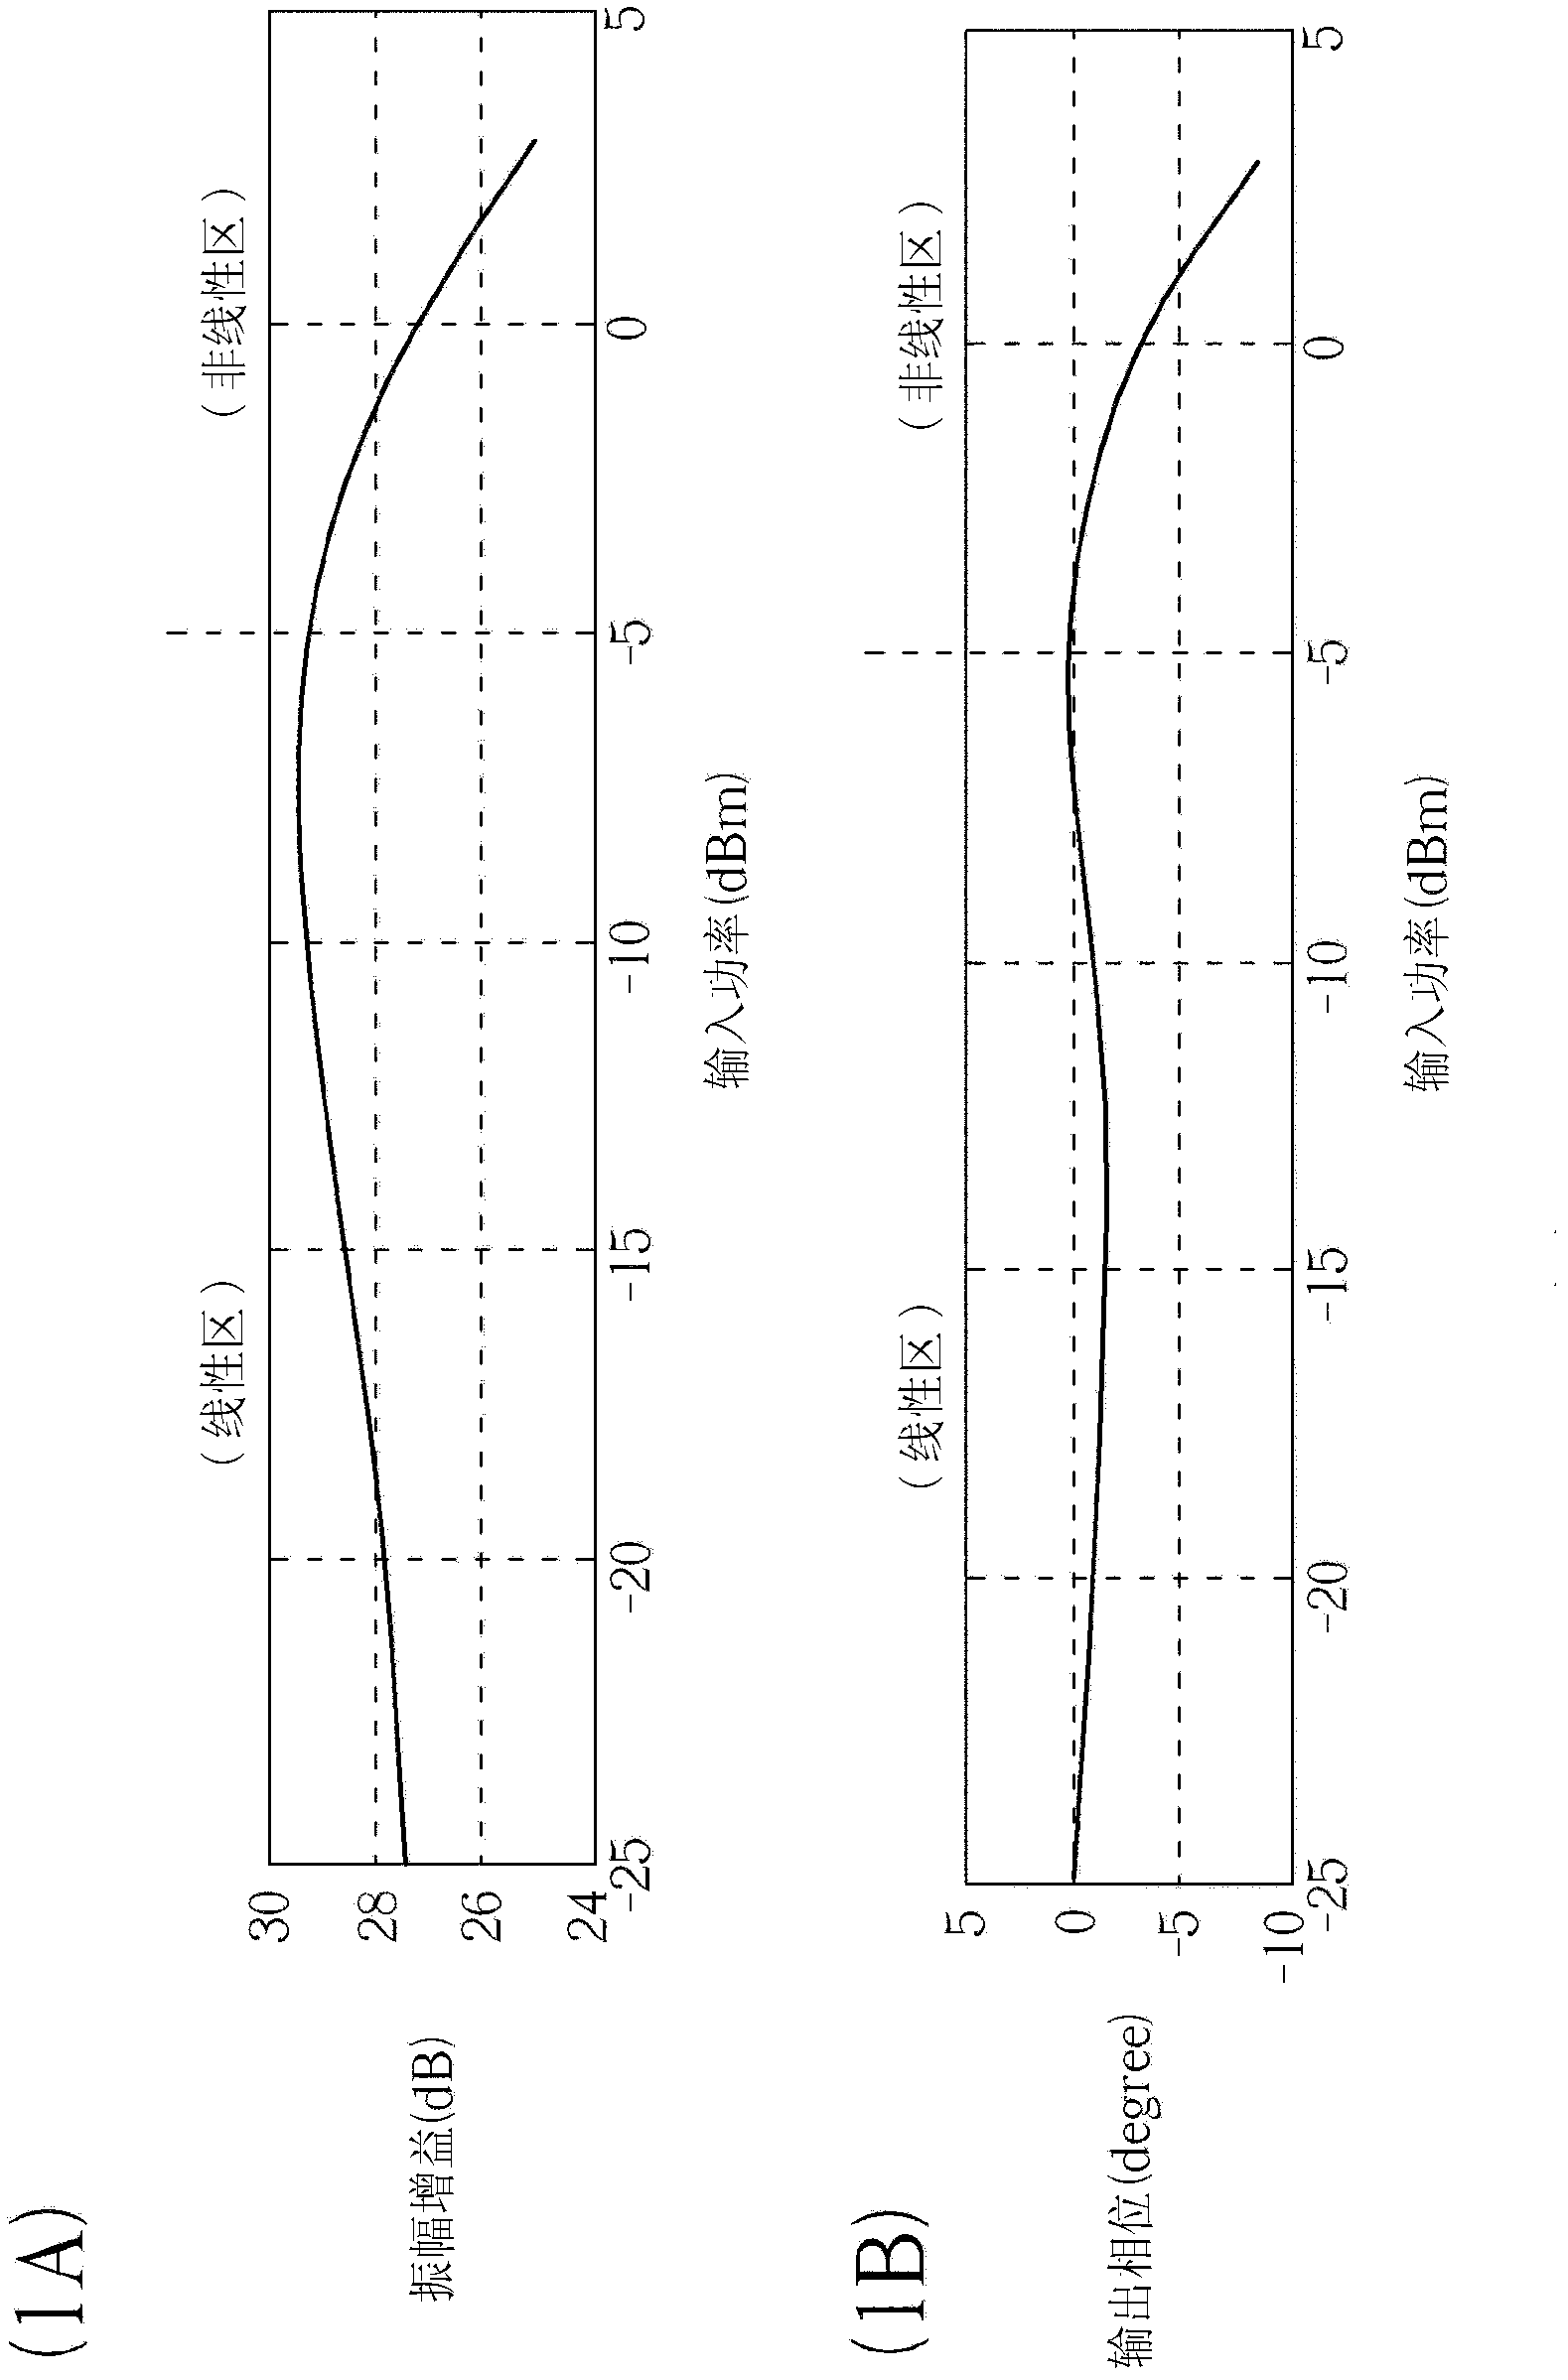 Compensation device for power amplifier and related method